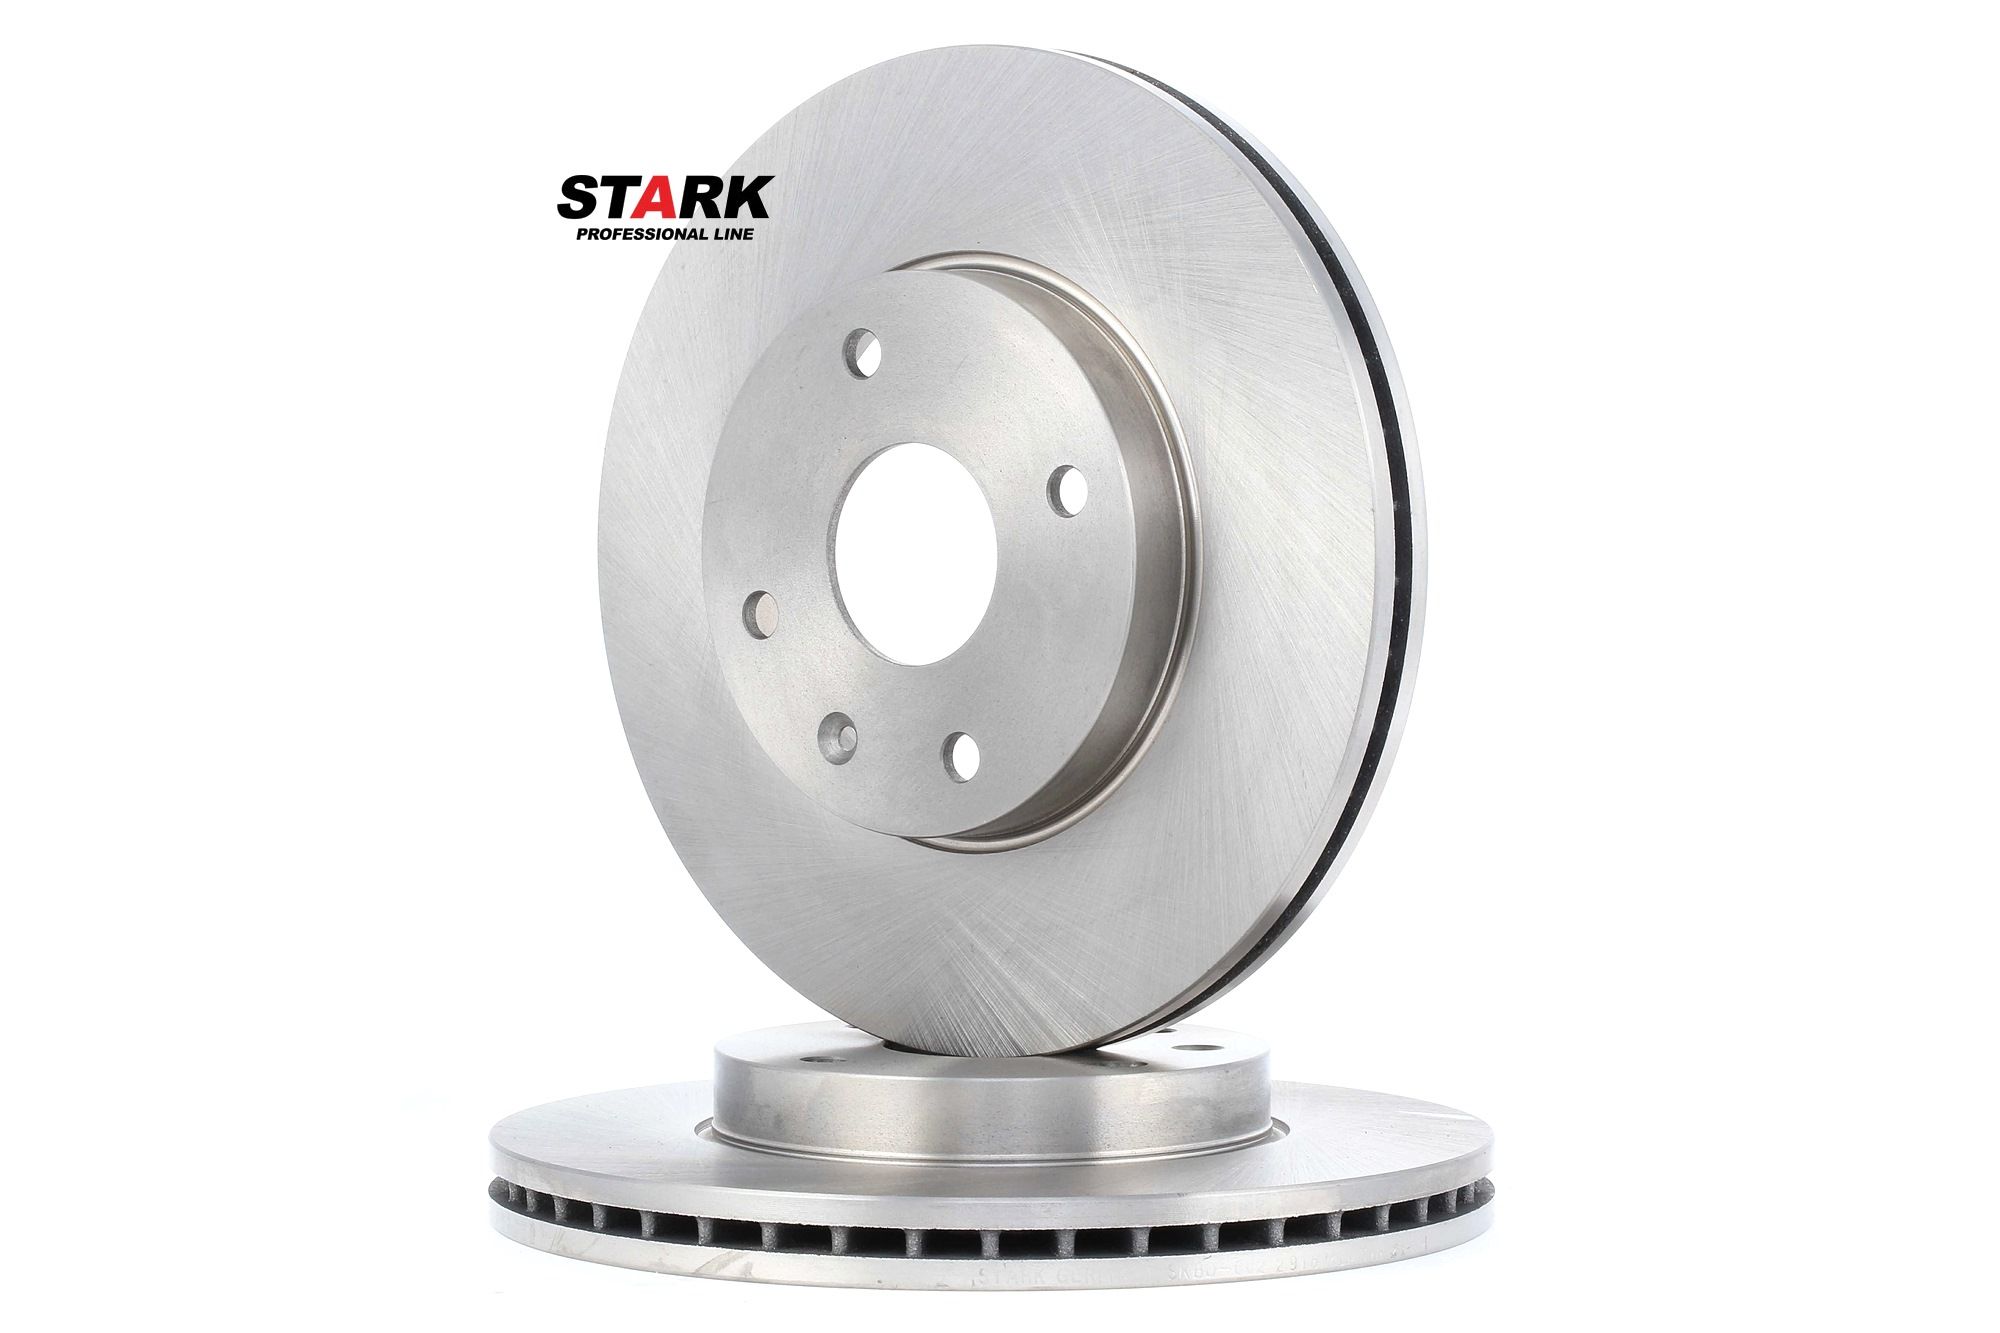 STARK SKBD-0023093 Brake disc Front Axle, 305,0x28mm, 4/8x98,0, Vented, Uncoated